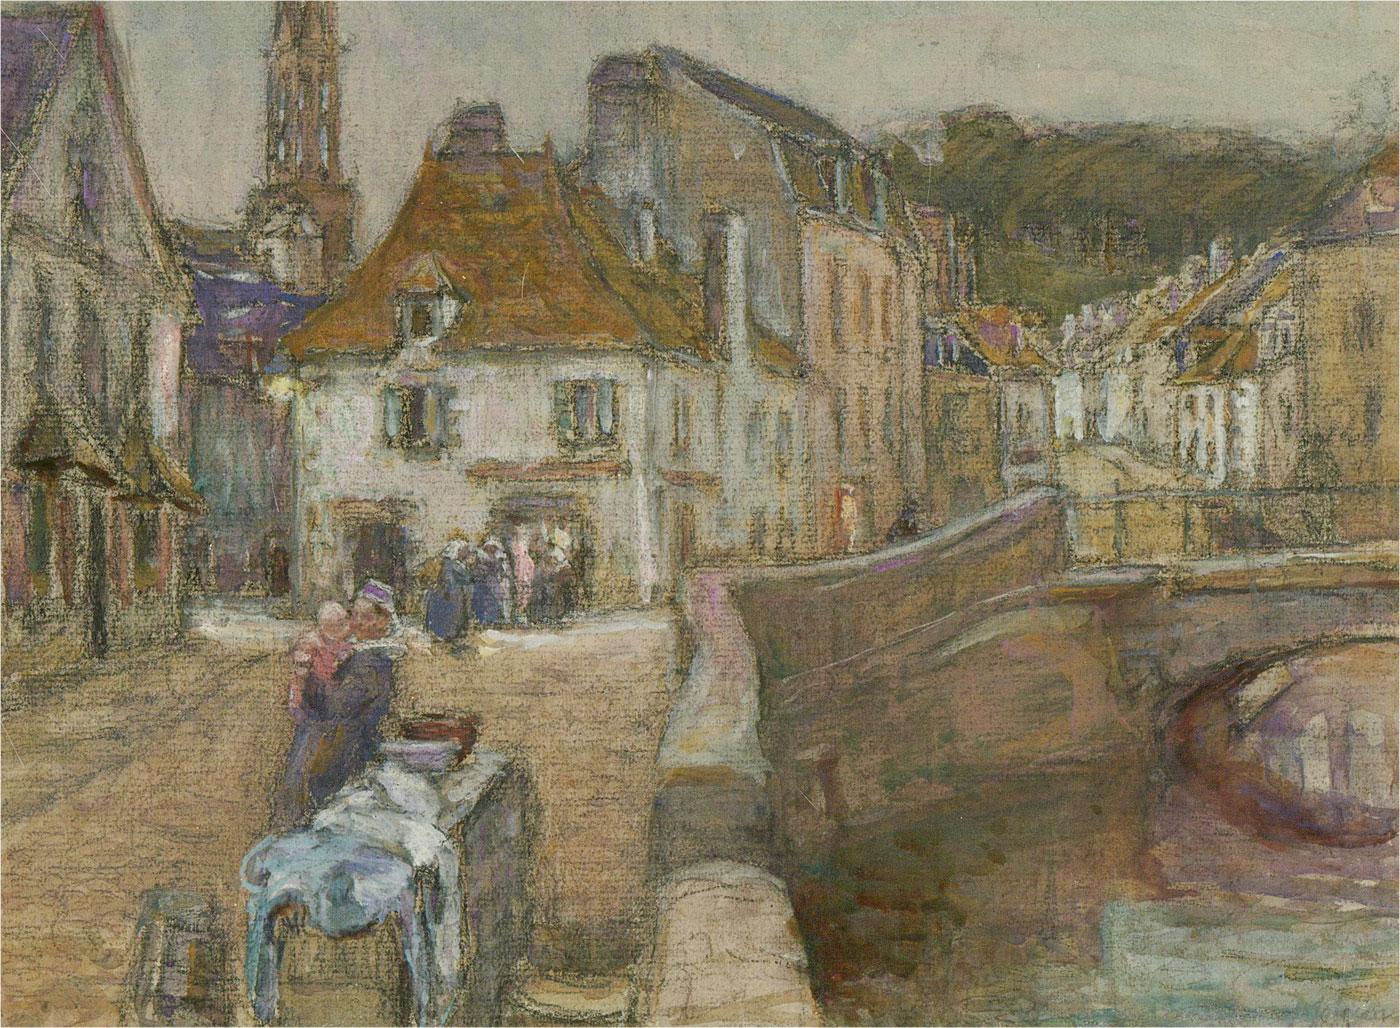 A charming early 20th Century watercolour with graphite detailing, showing a view of a quaint French harbour town. A woman holds her baby in the foreground by the harbour wall with a vignette up the narrow winding streets of the town towards the